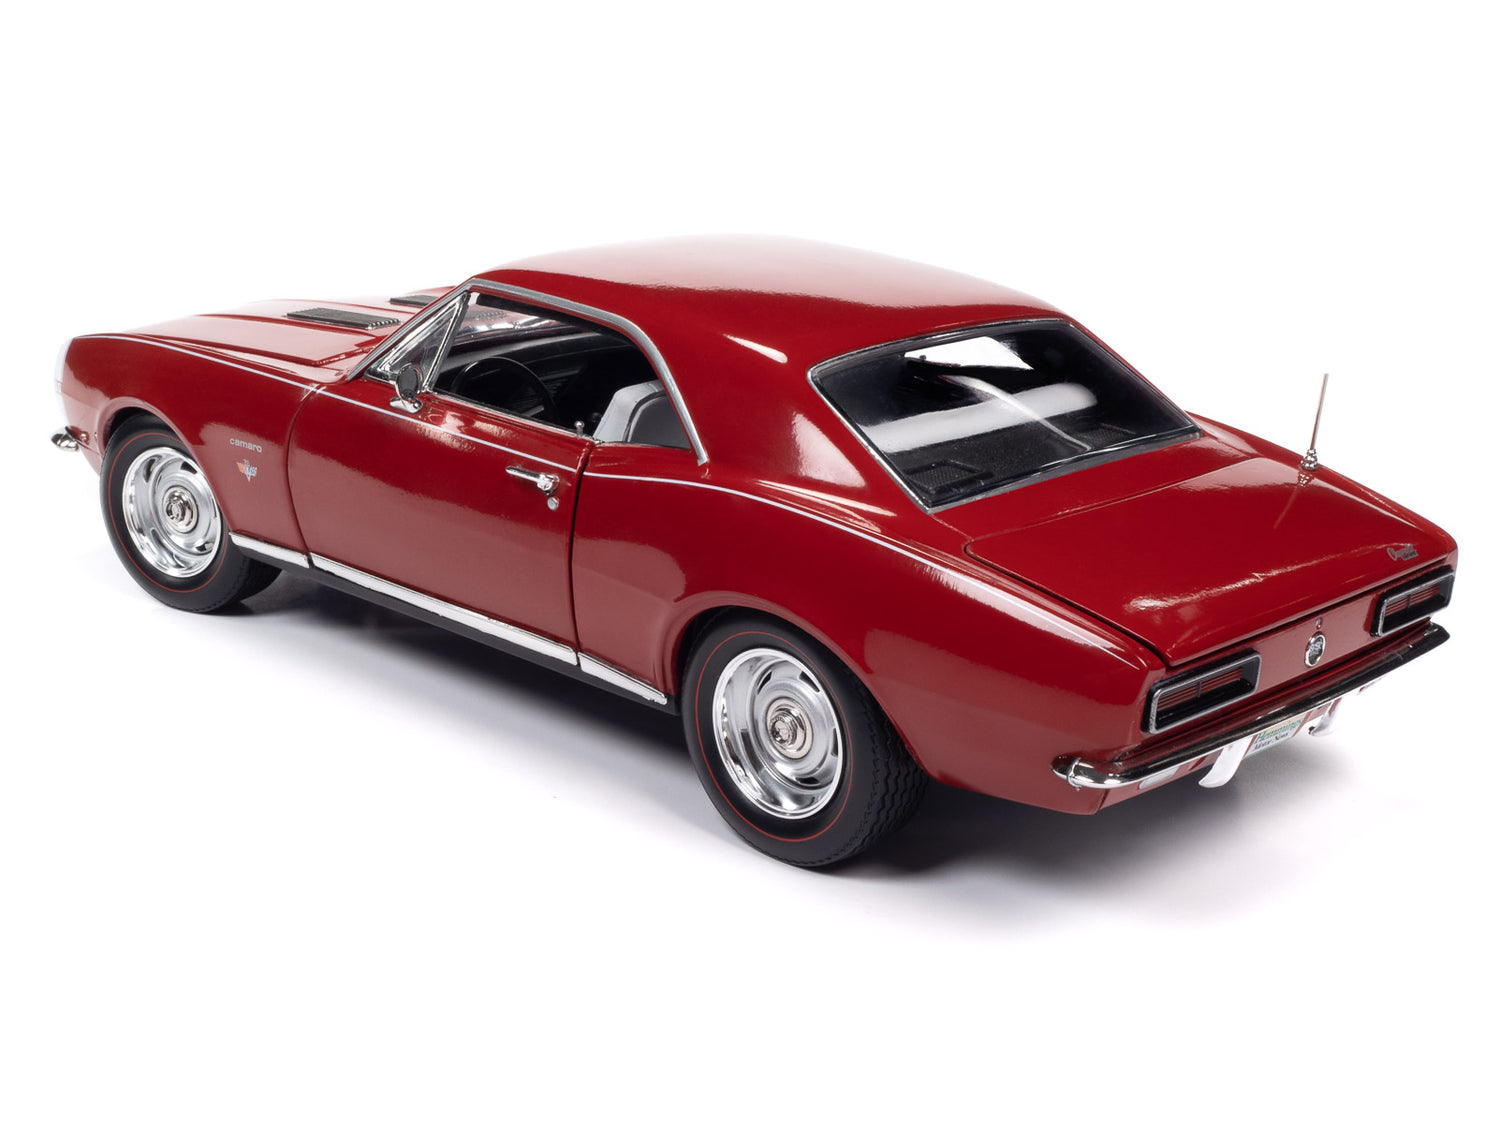 American Muscle 1967 Chevrolet Camaro RS/SS (Hemmings) 1:18 Scale Diecast